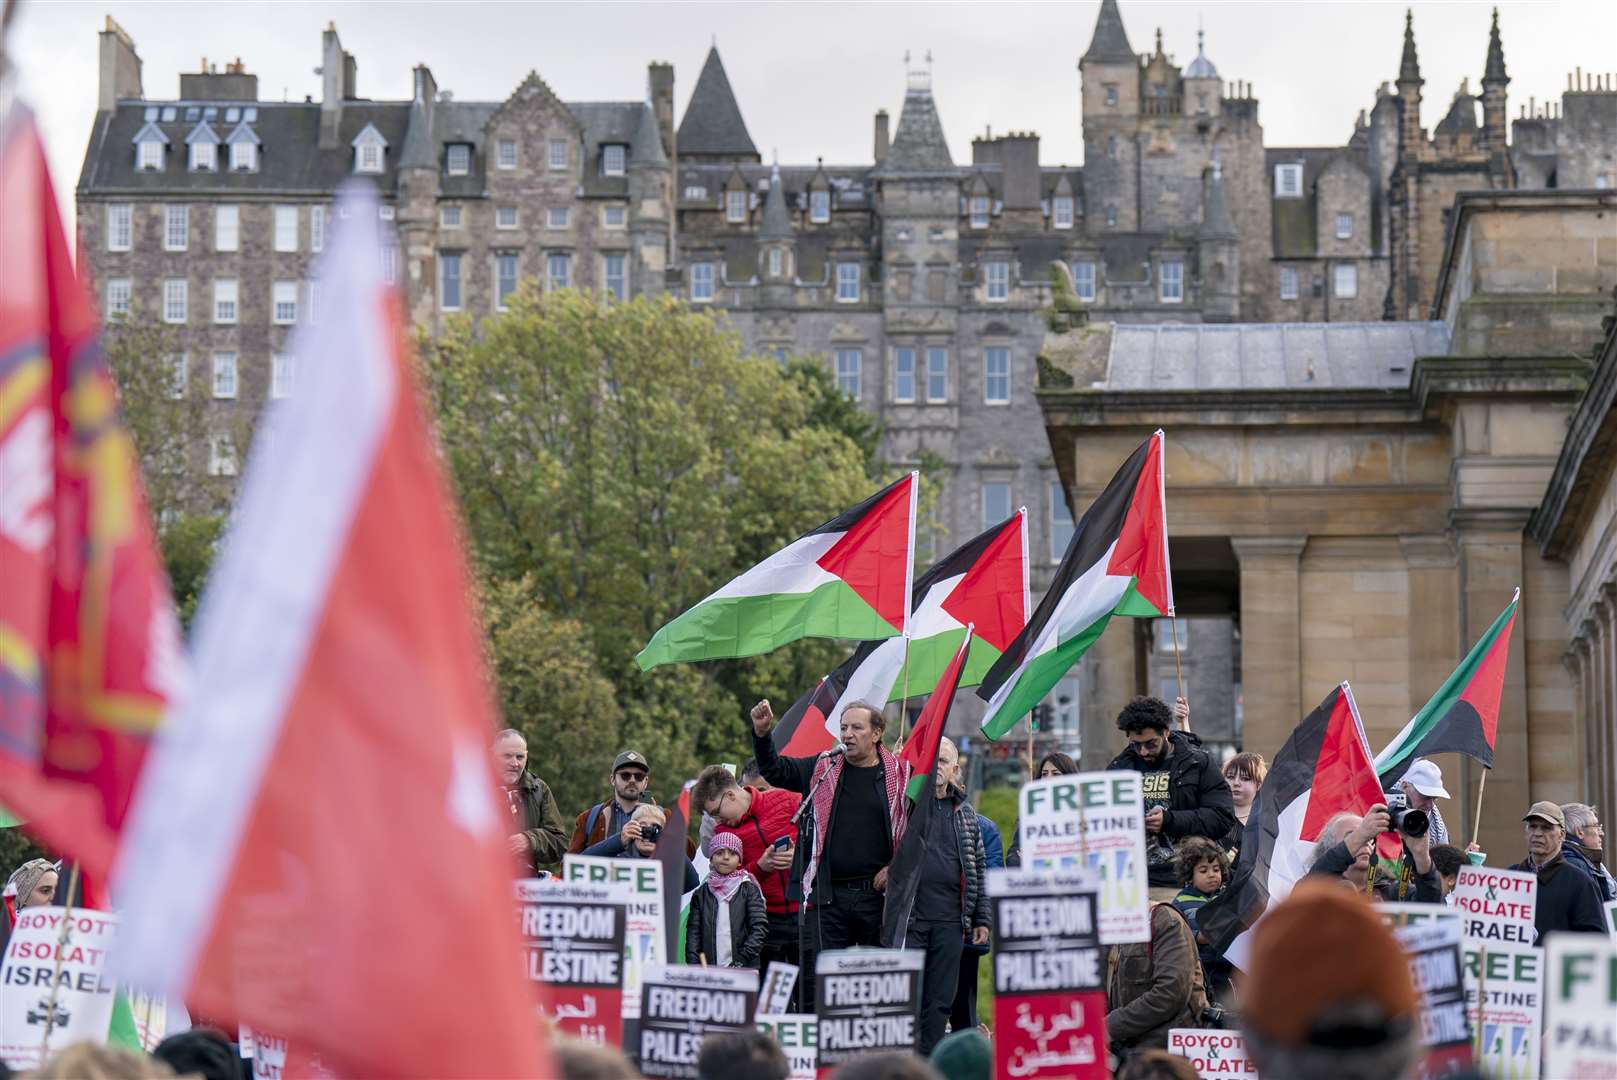 Protesters during a Scottish Palestine Solidarity Campaign demonstration in Edinburgh (Jane Barlow/PA)